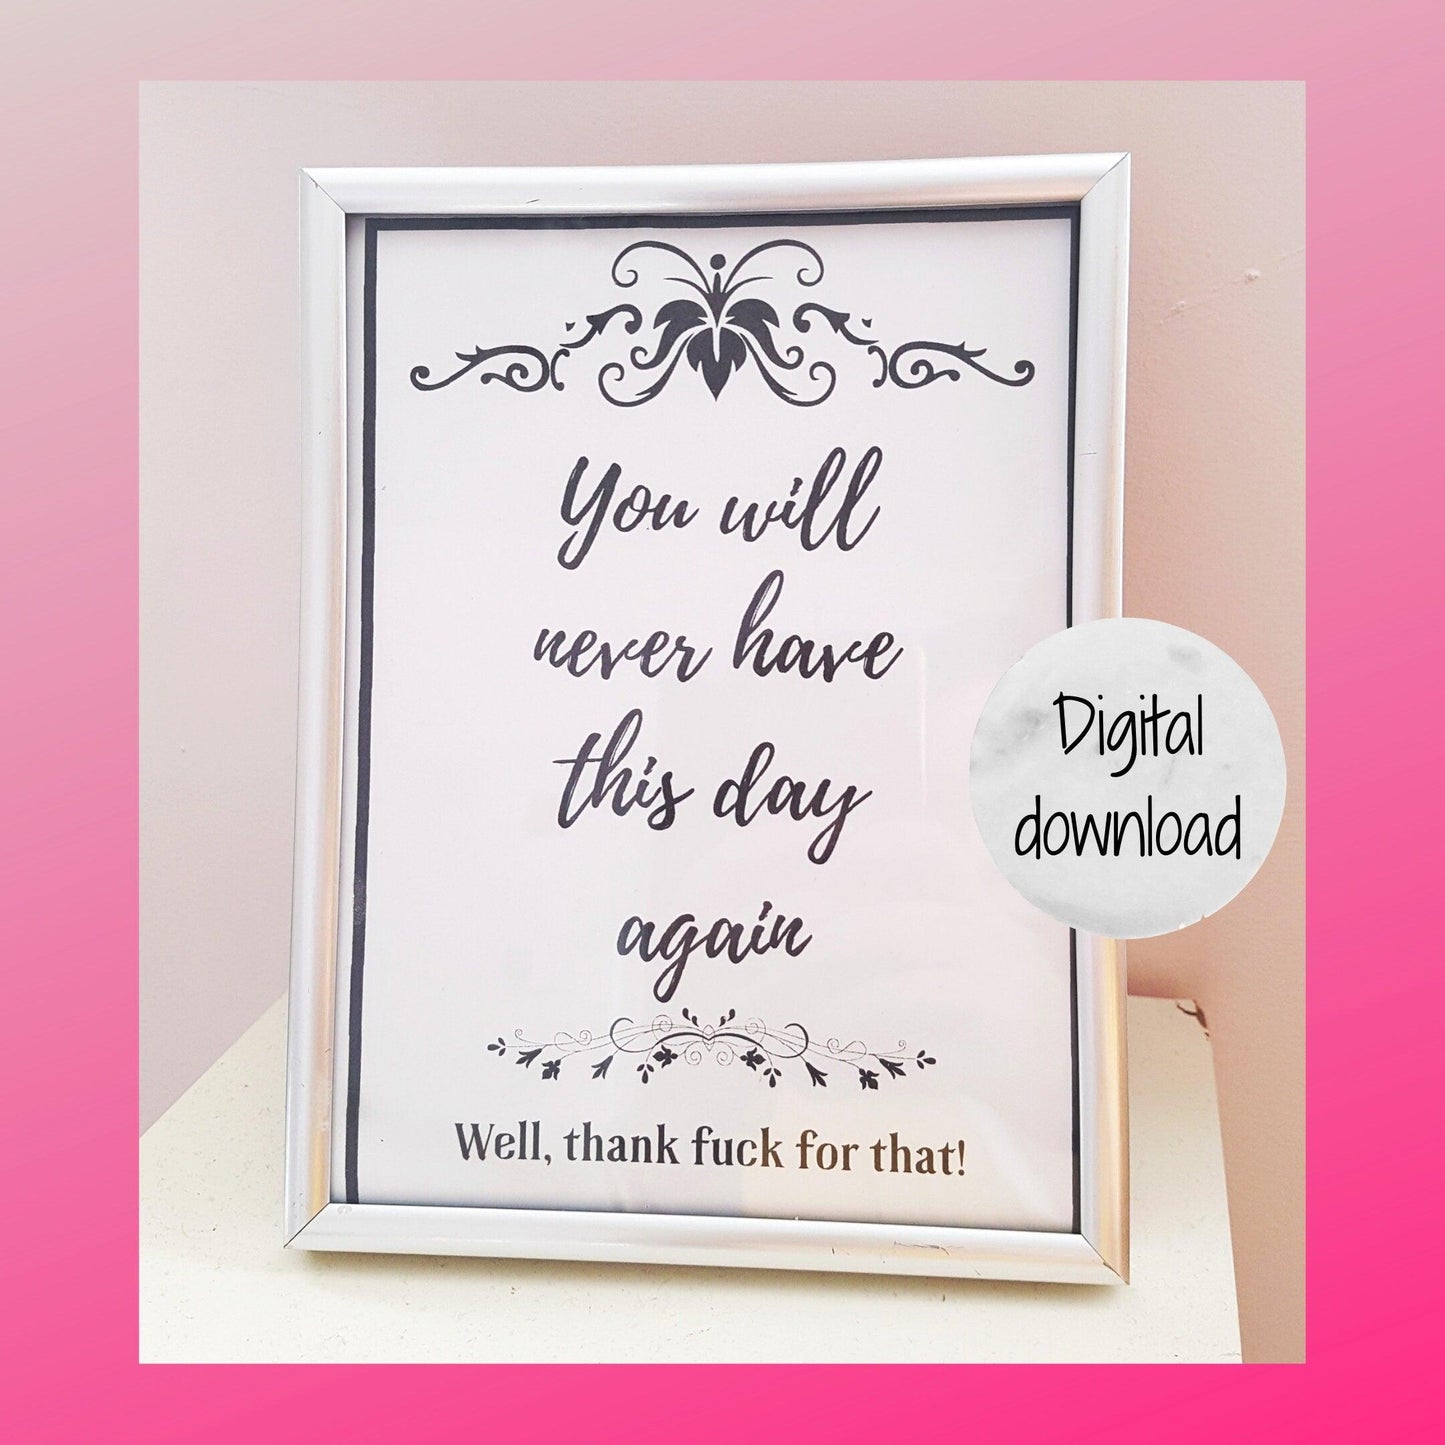 Digital download image, showing the text 'You will never have this day again. Well thank fuck for that!' Image is black and white and has a decorative scroll border. Image has been downloaded, printed off and put in a silver frame for demonstration purposes